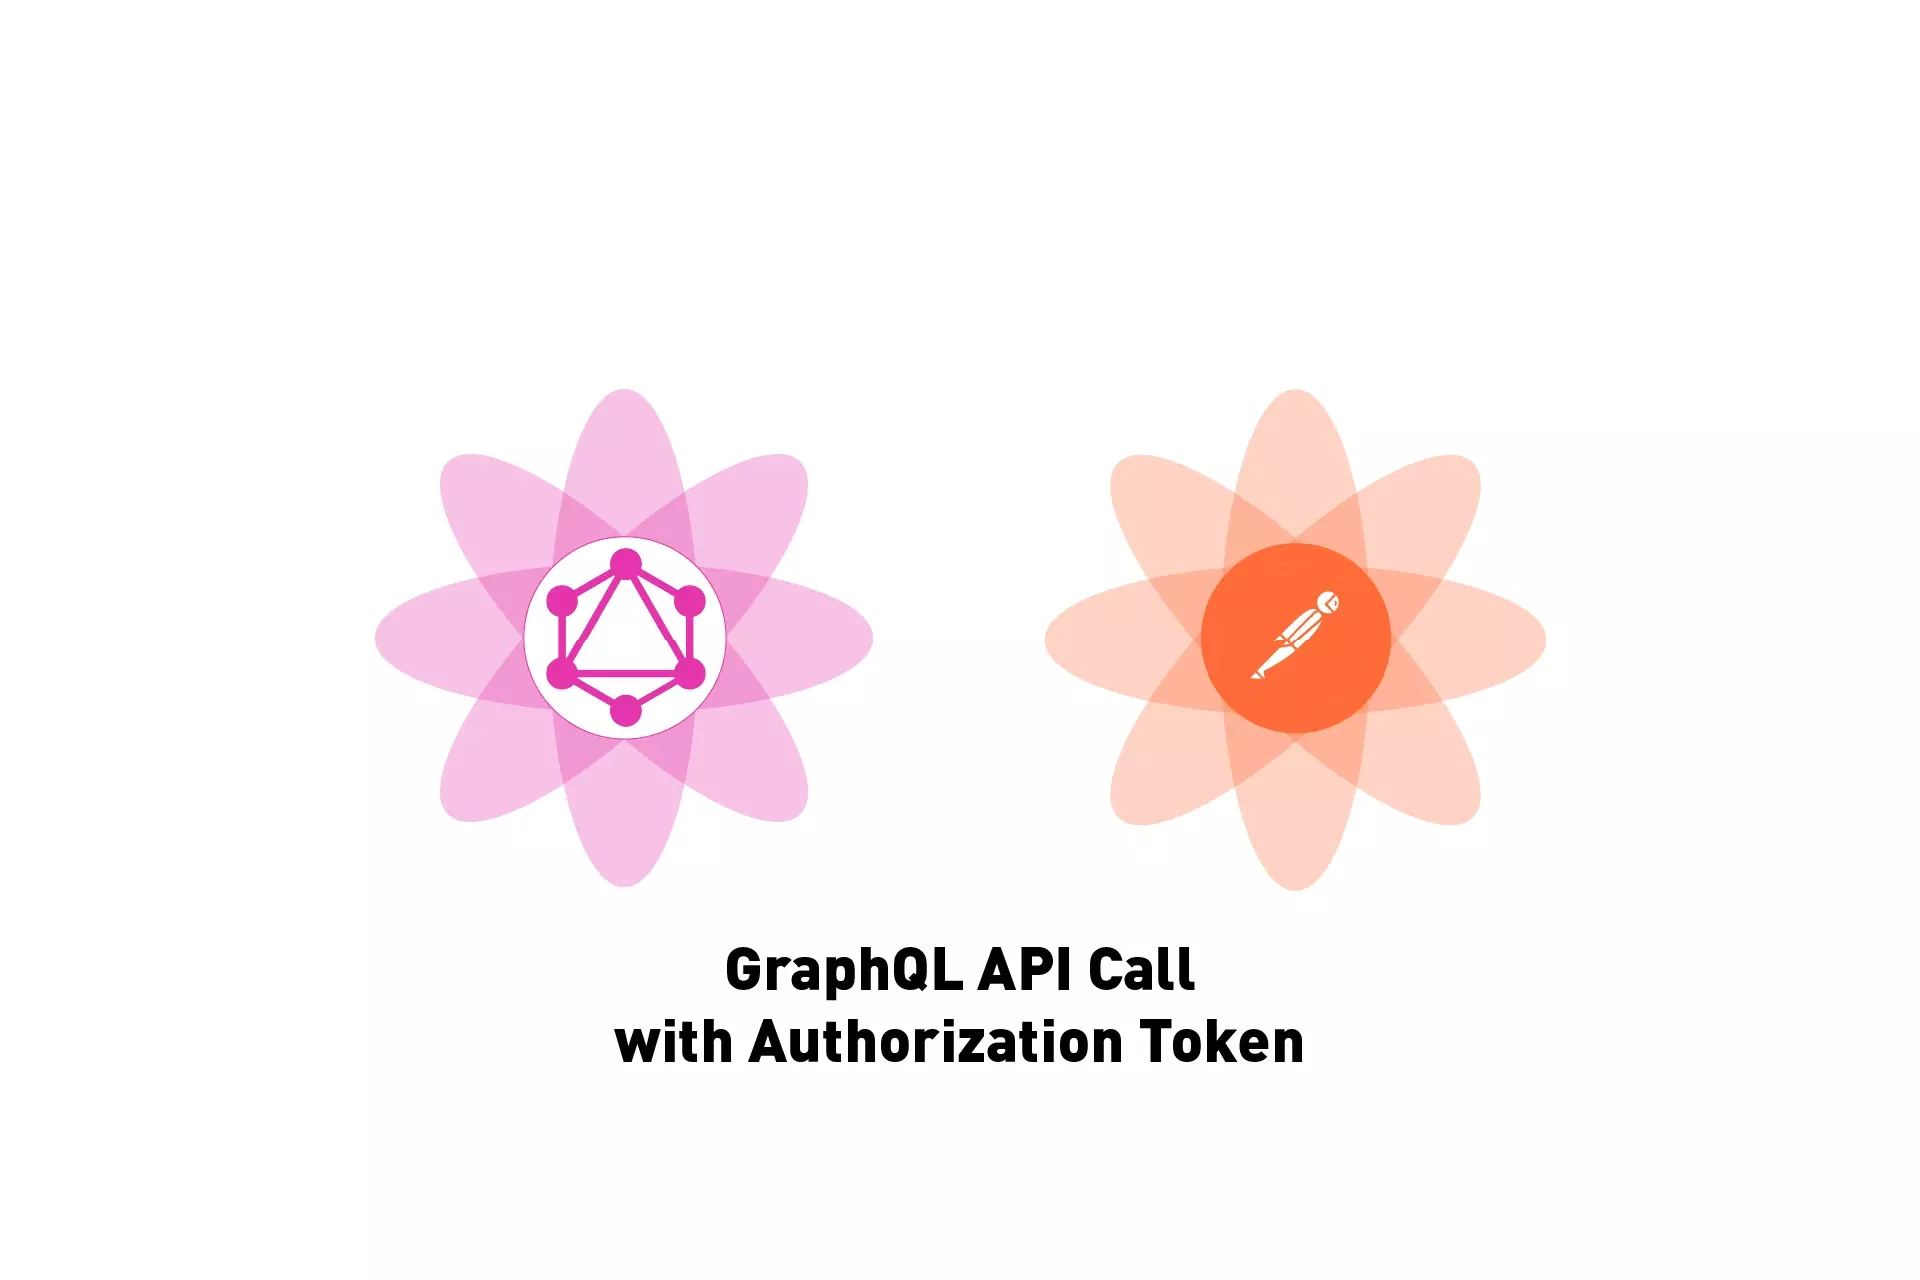 Two flowers that represents GraphQL and Postman side by side. Beneath them sits the text "GraphQL API Call with Authorization Token."